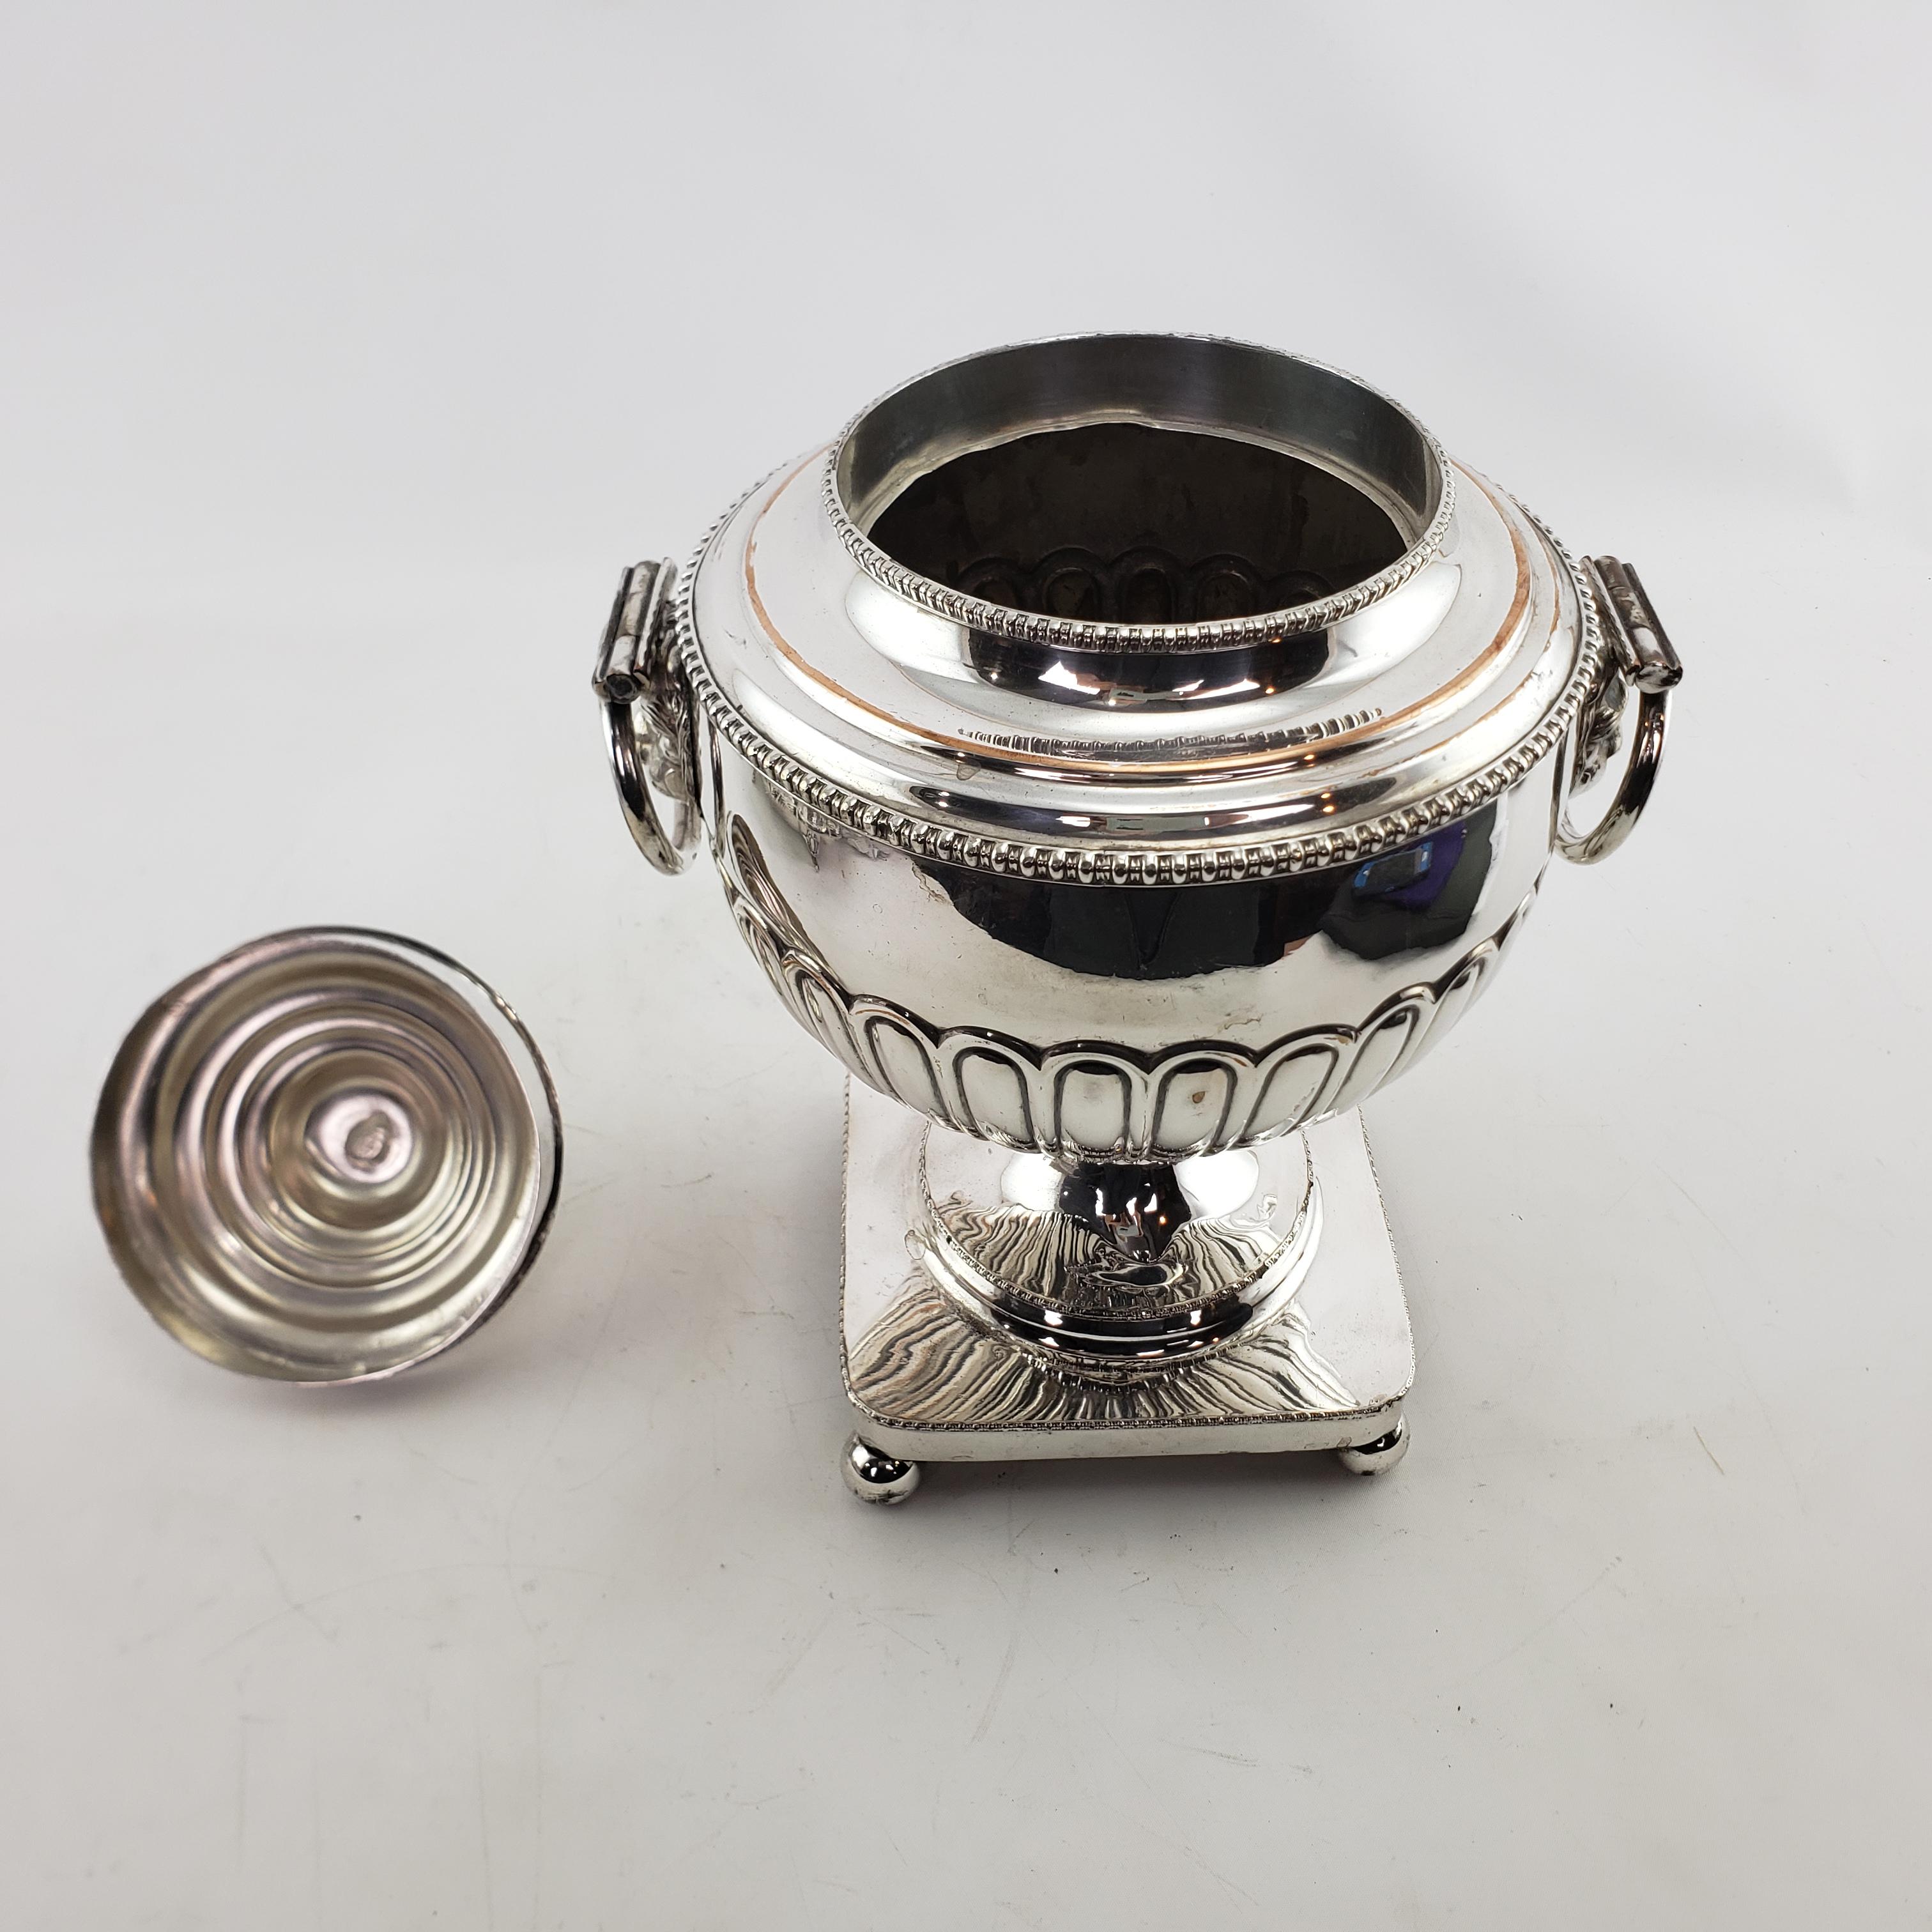 Antique Georgian Styled Silver Plated Tea or Hot Water Urn with Lion Mounts For Sale 5